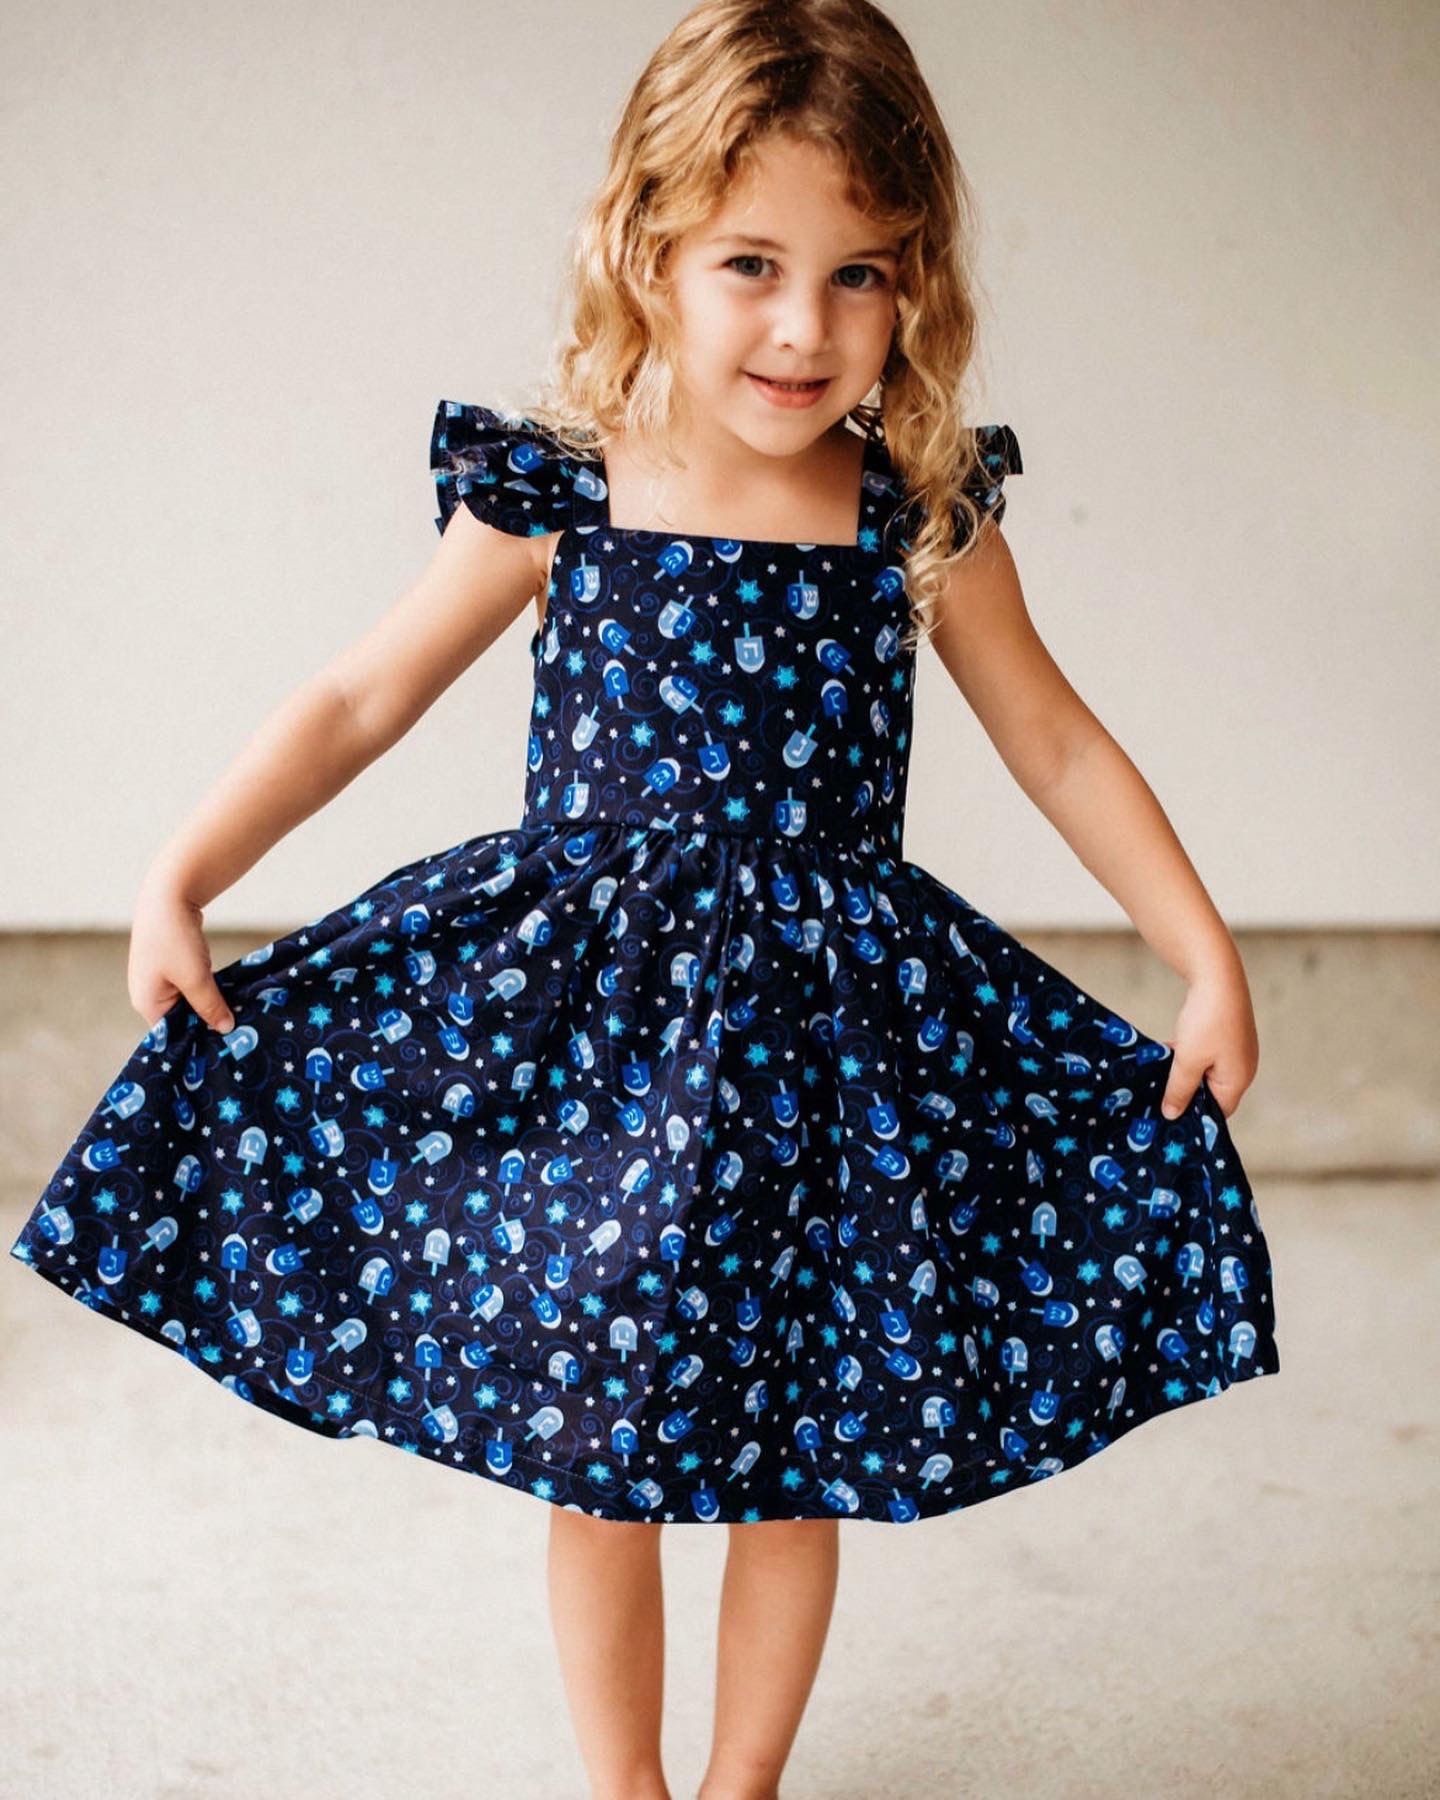 Girls Holiday Outfits and Dresses We Love - The Cuteness